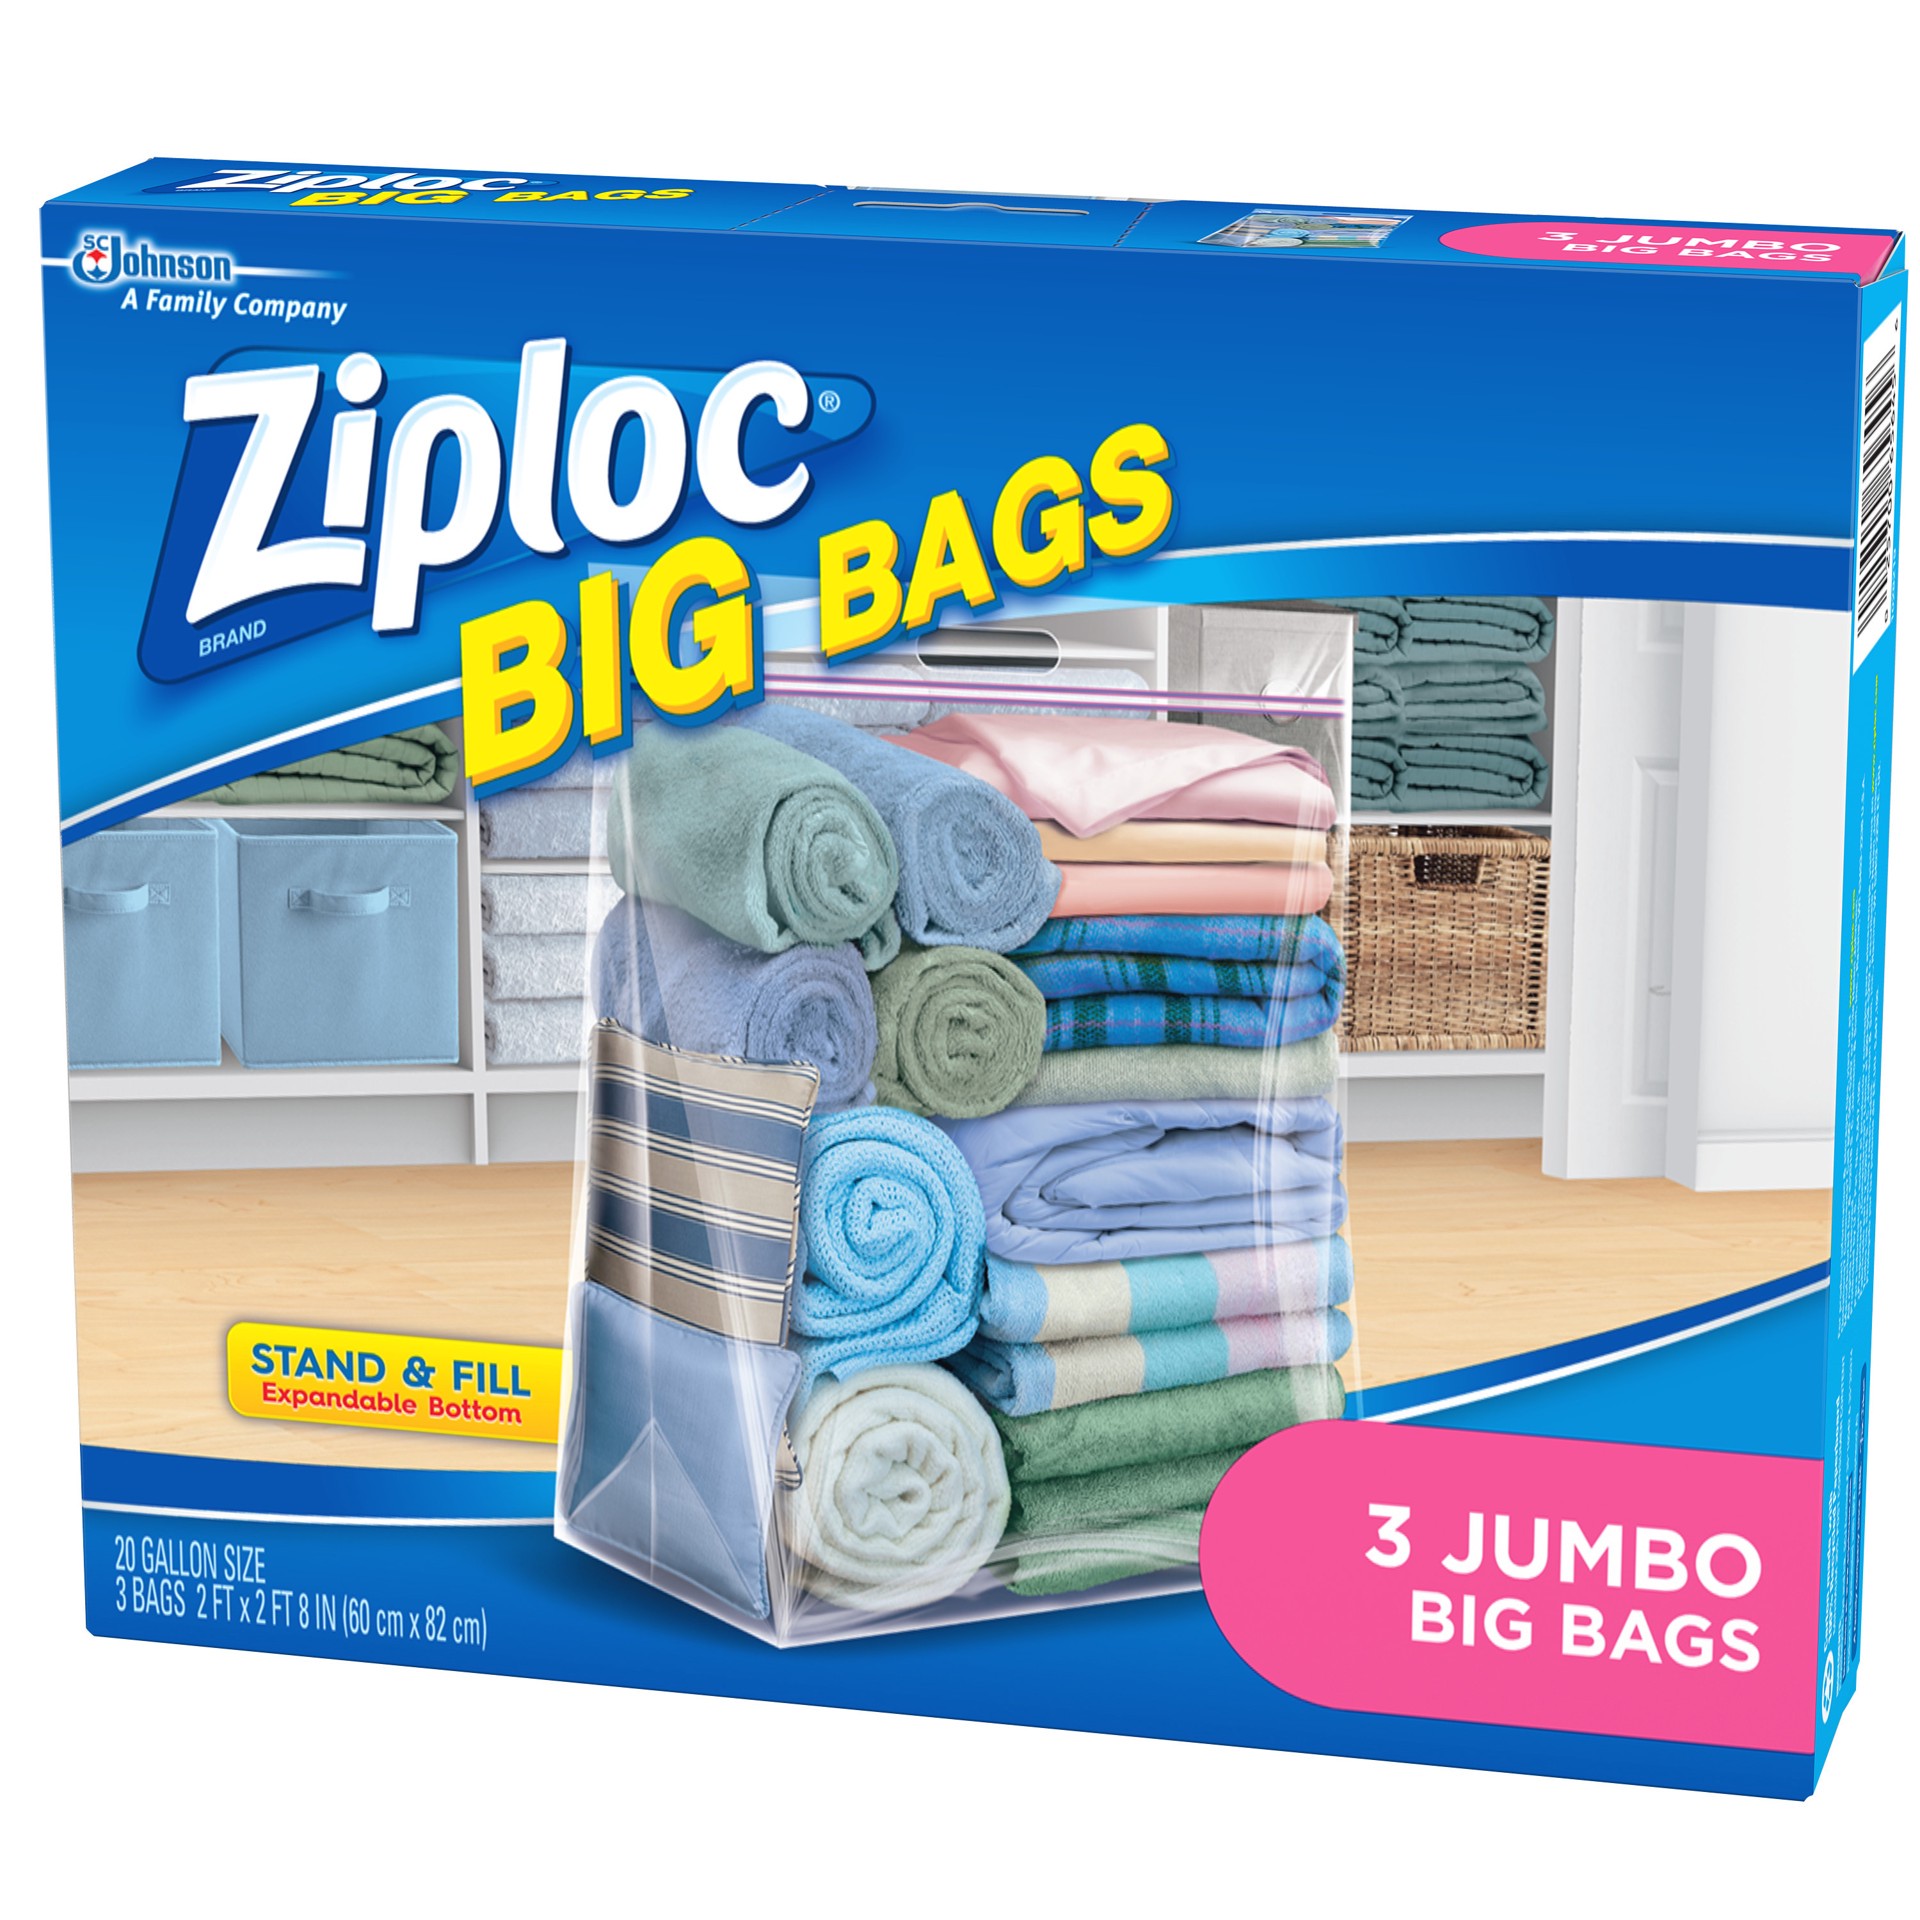 slide 3 of 5, Ziploc Big Bags, Jumbo, Secure Double Zipper, 3 CT, Expandable Bottom, Heavy-Duty Plastic, Built-In Handles, Flexible Shape to Fit Where Storage Boxes Can't, 3 ct